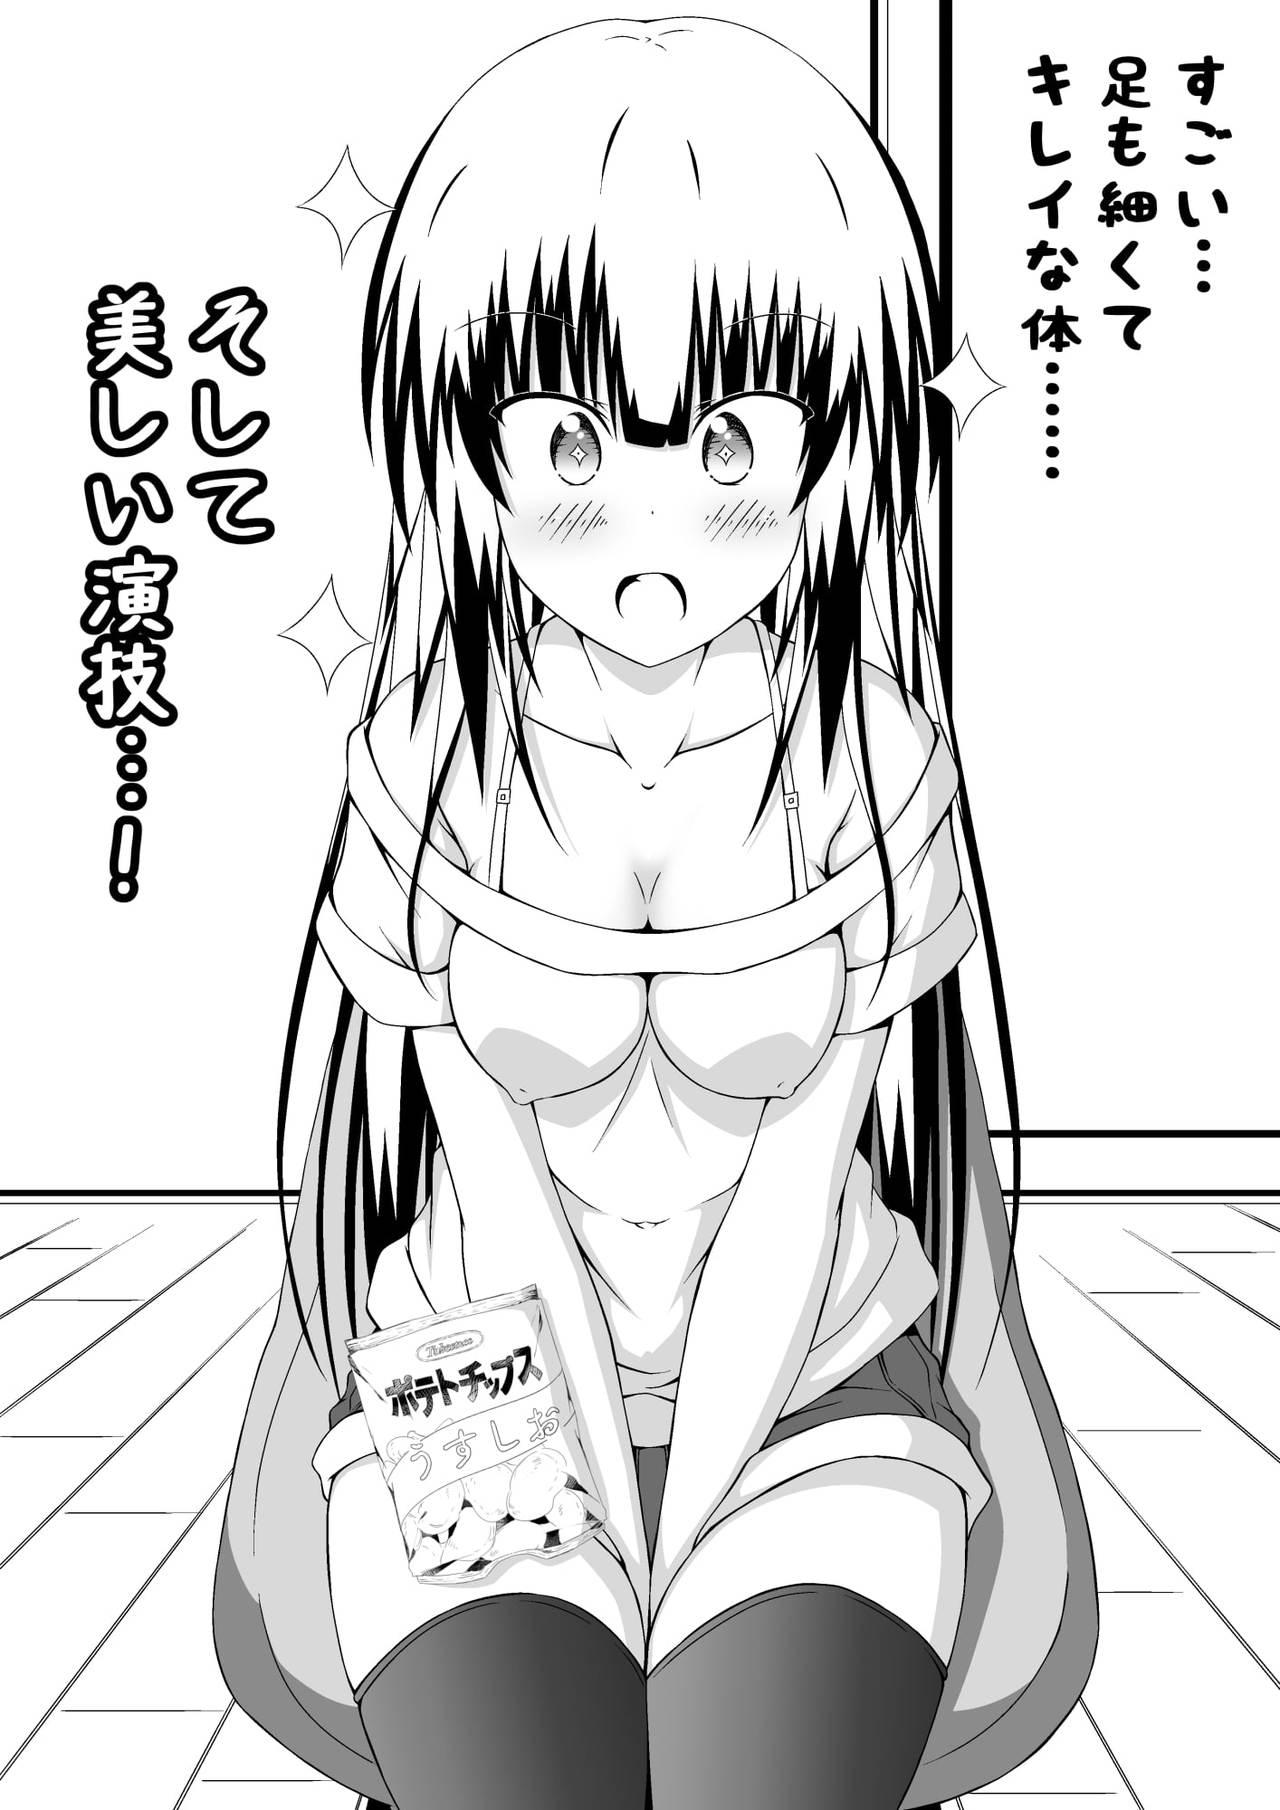 Home Nyotaika DT to Oppai JD! 3 Storyline - Page 5